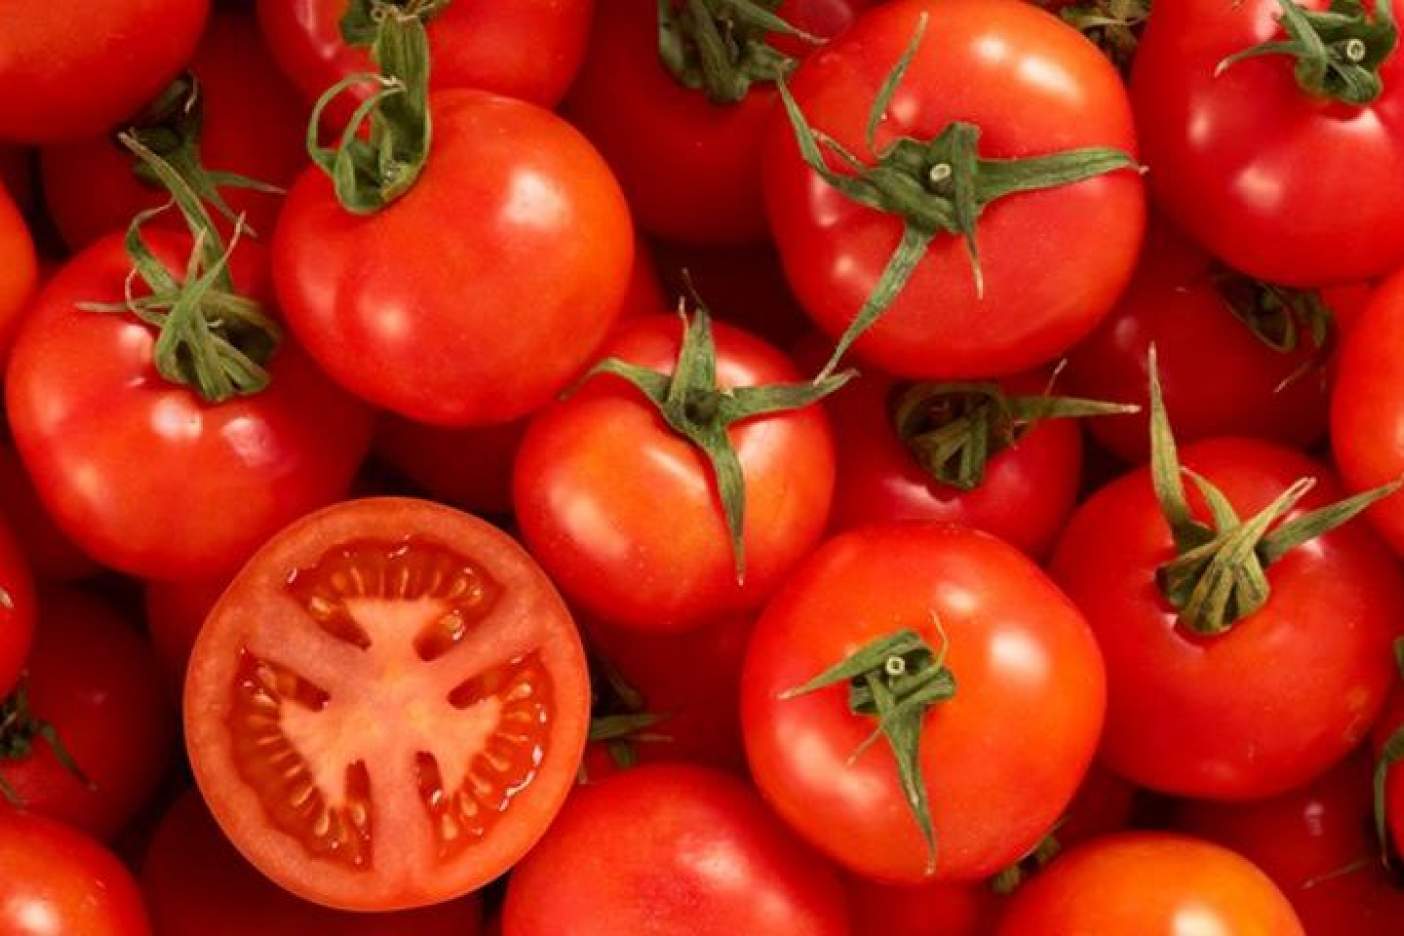 Seder considers “impossible” to inspect Mexican tomato exports at 100%